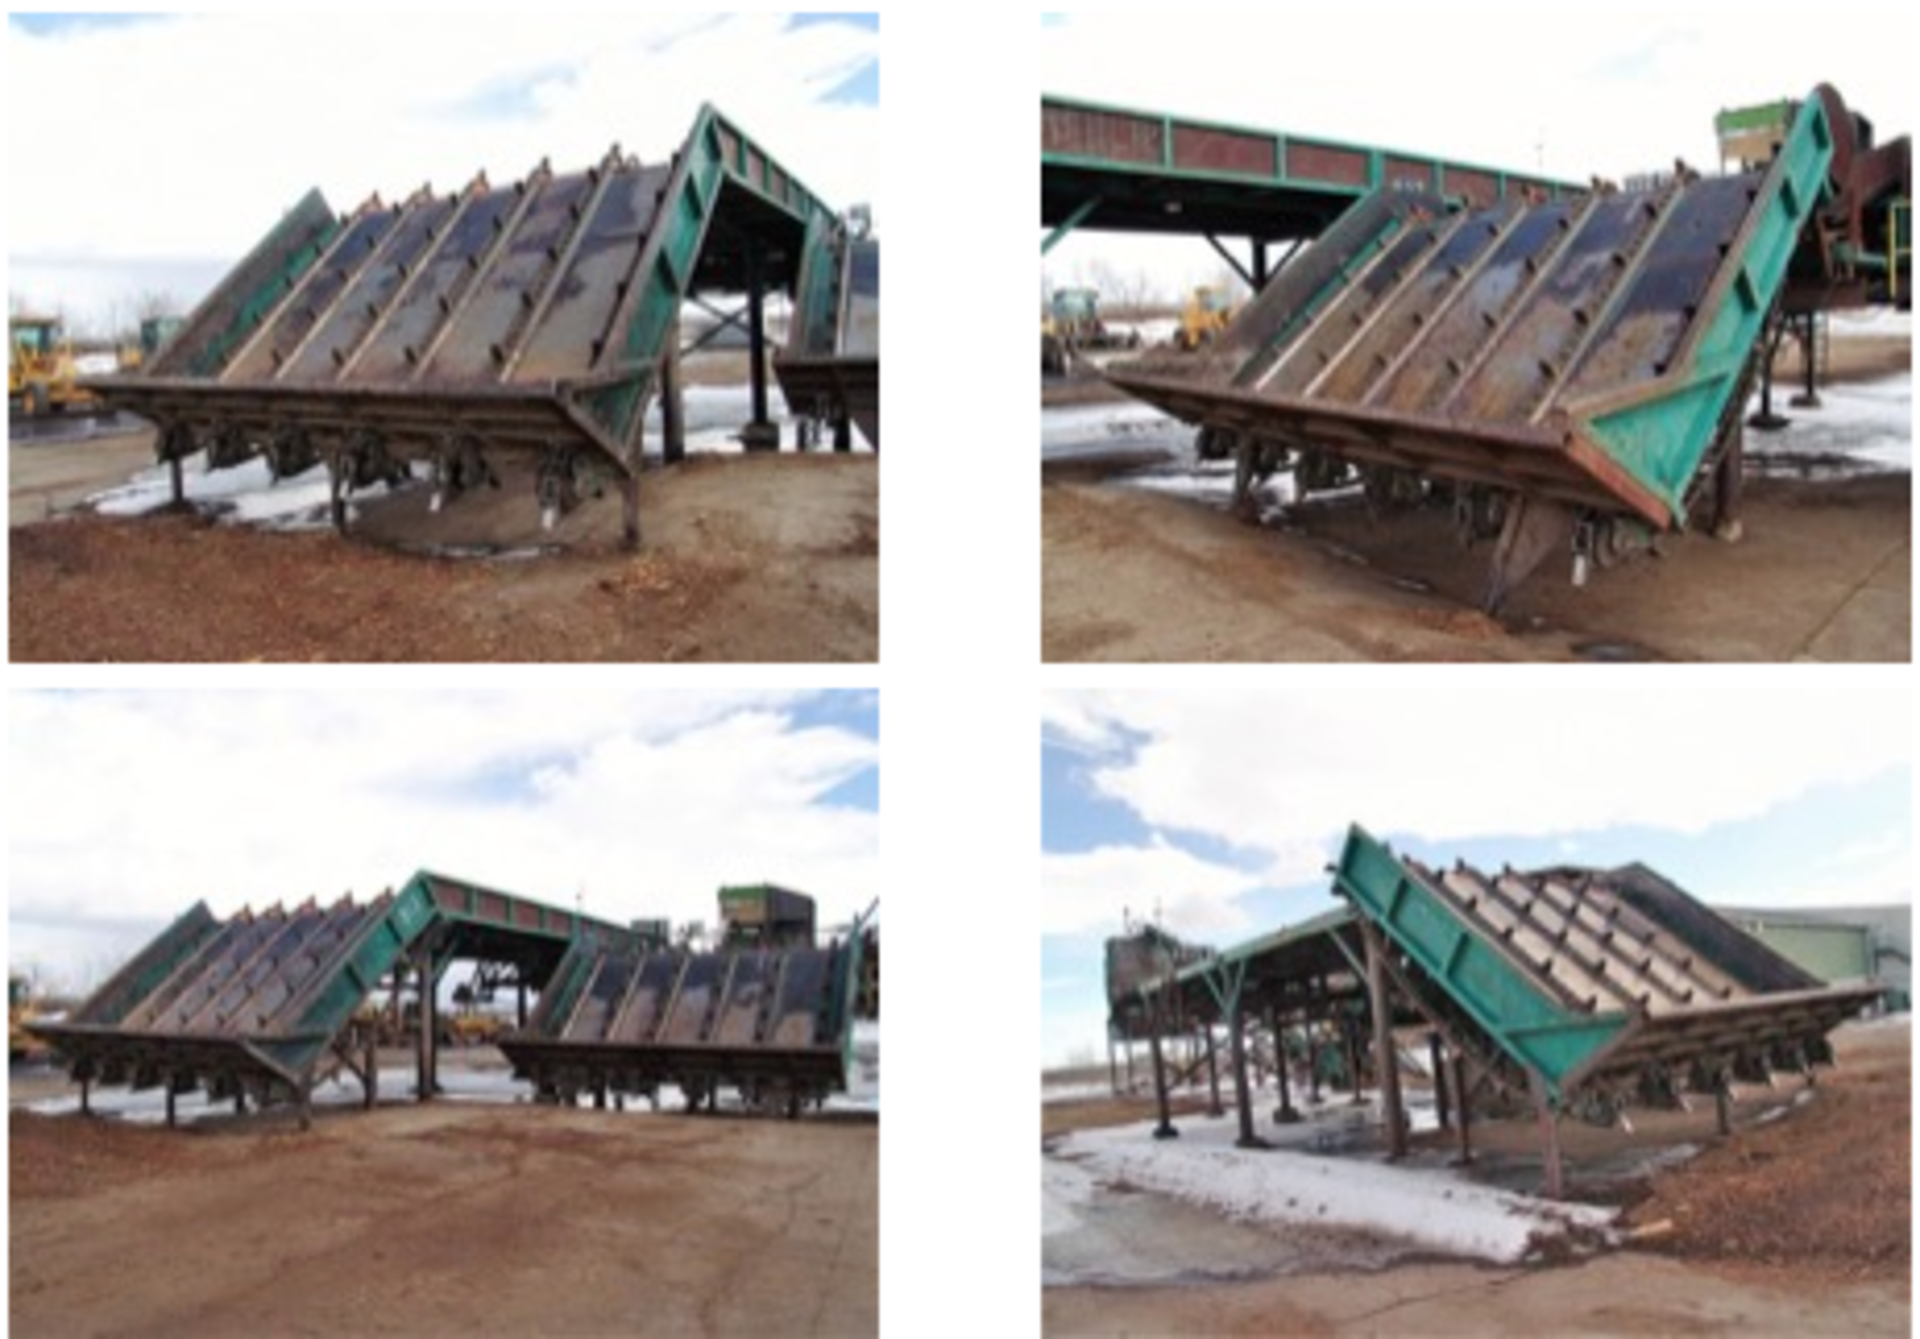 Full Catalog Coming Soon! Day 1 - MAJOR Sawmill Auction - Timeu Forest Products, Ltd. - Image 3 of 5